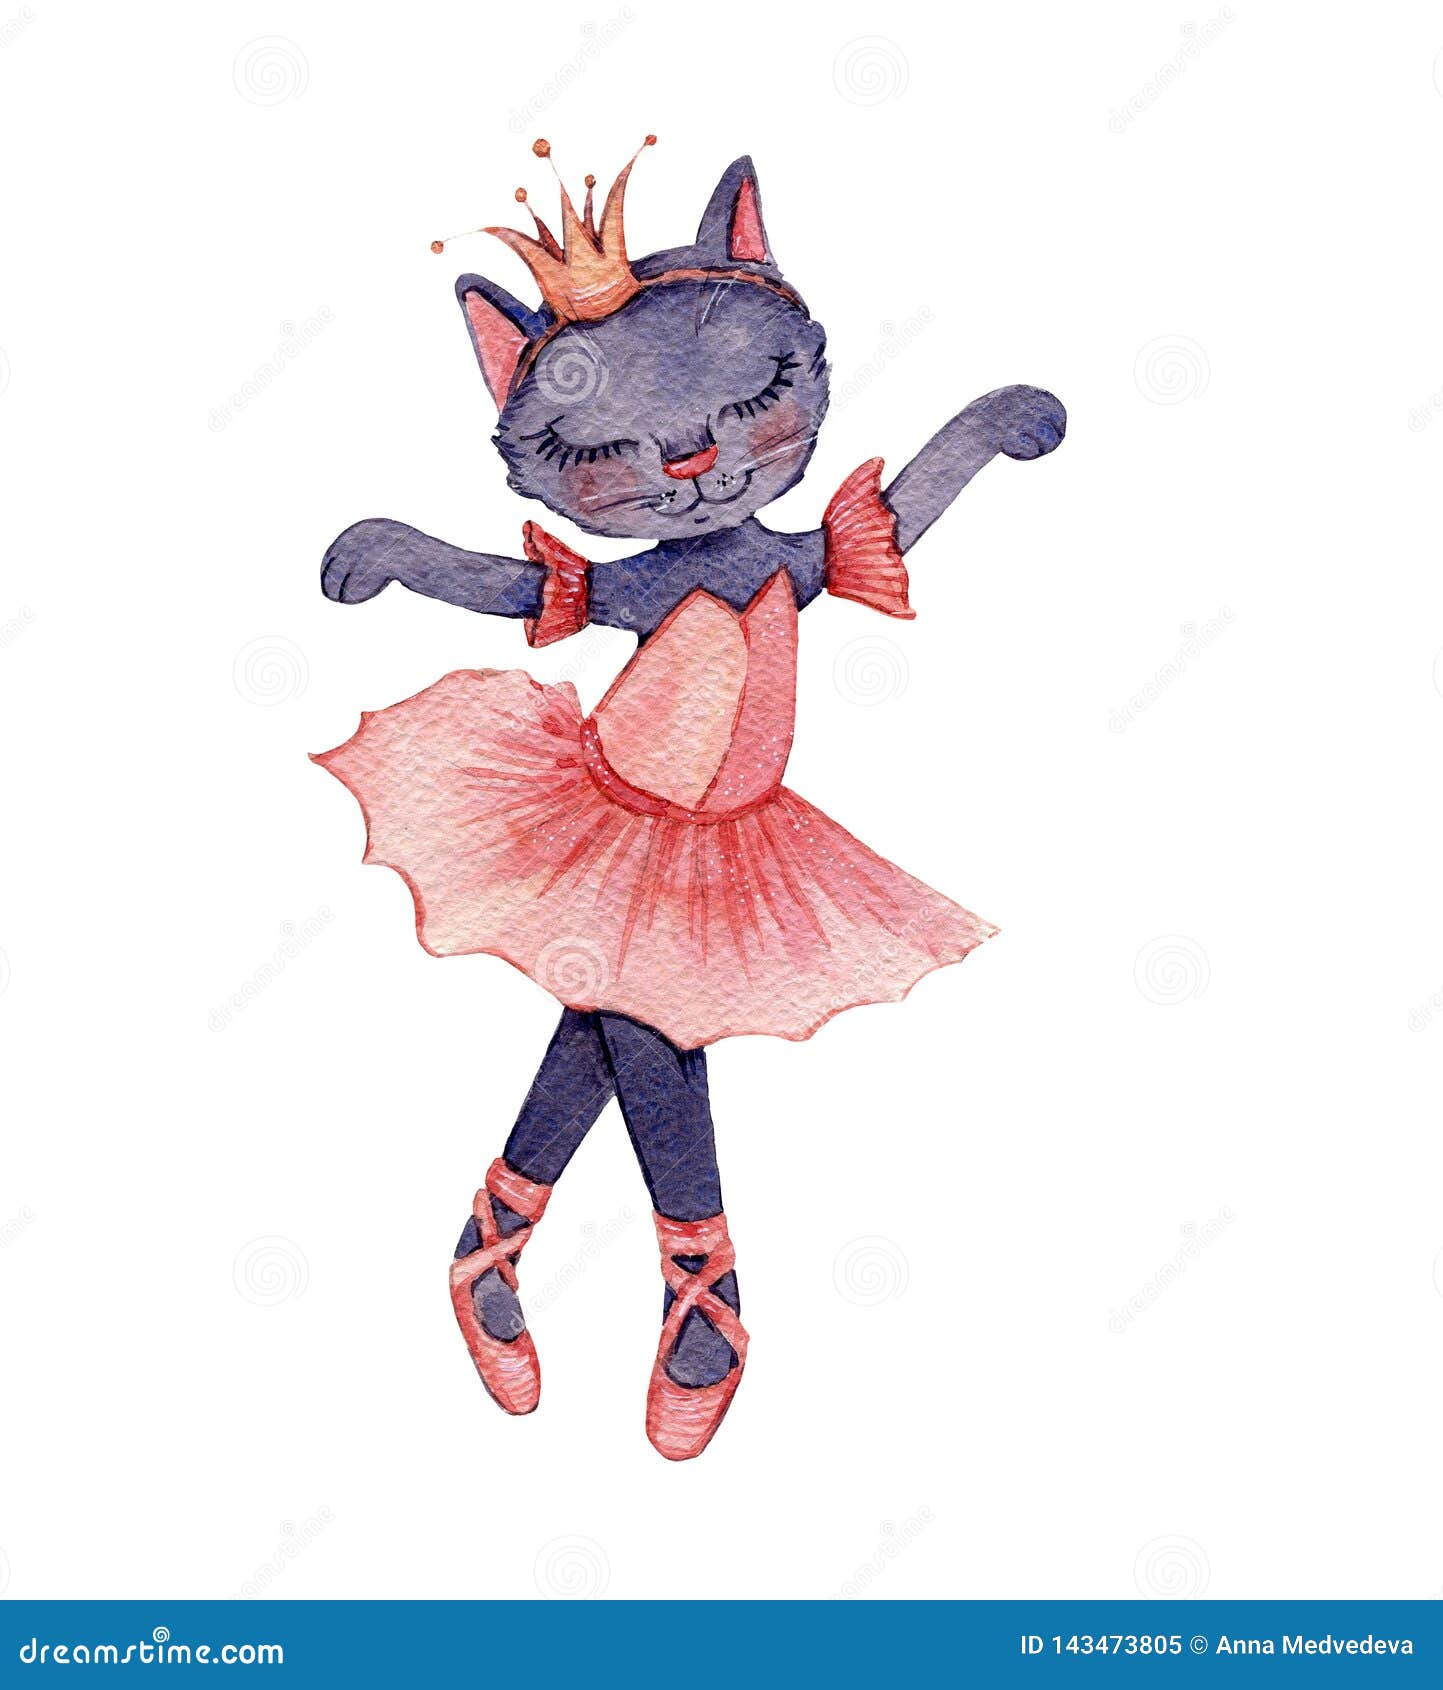 Watercolour Illustration of Cute Ballerina Cat Wearing Crown Image - Illustration of carrying, jpeg: